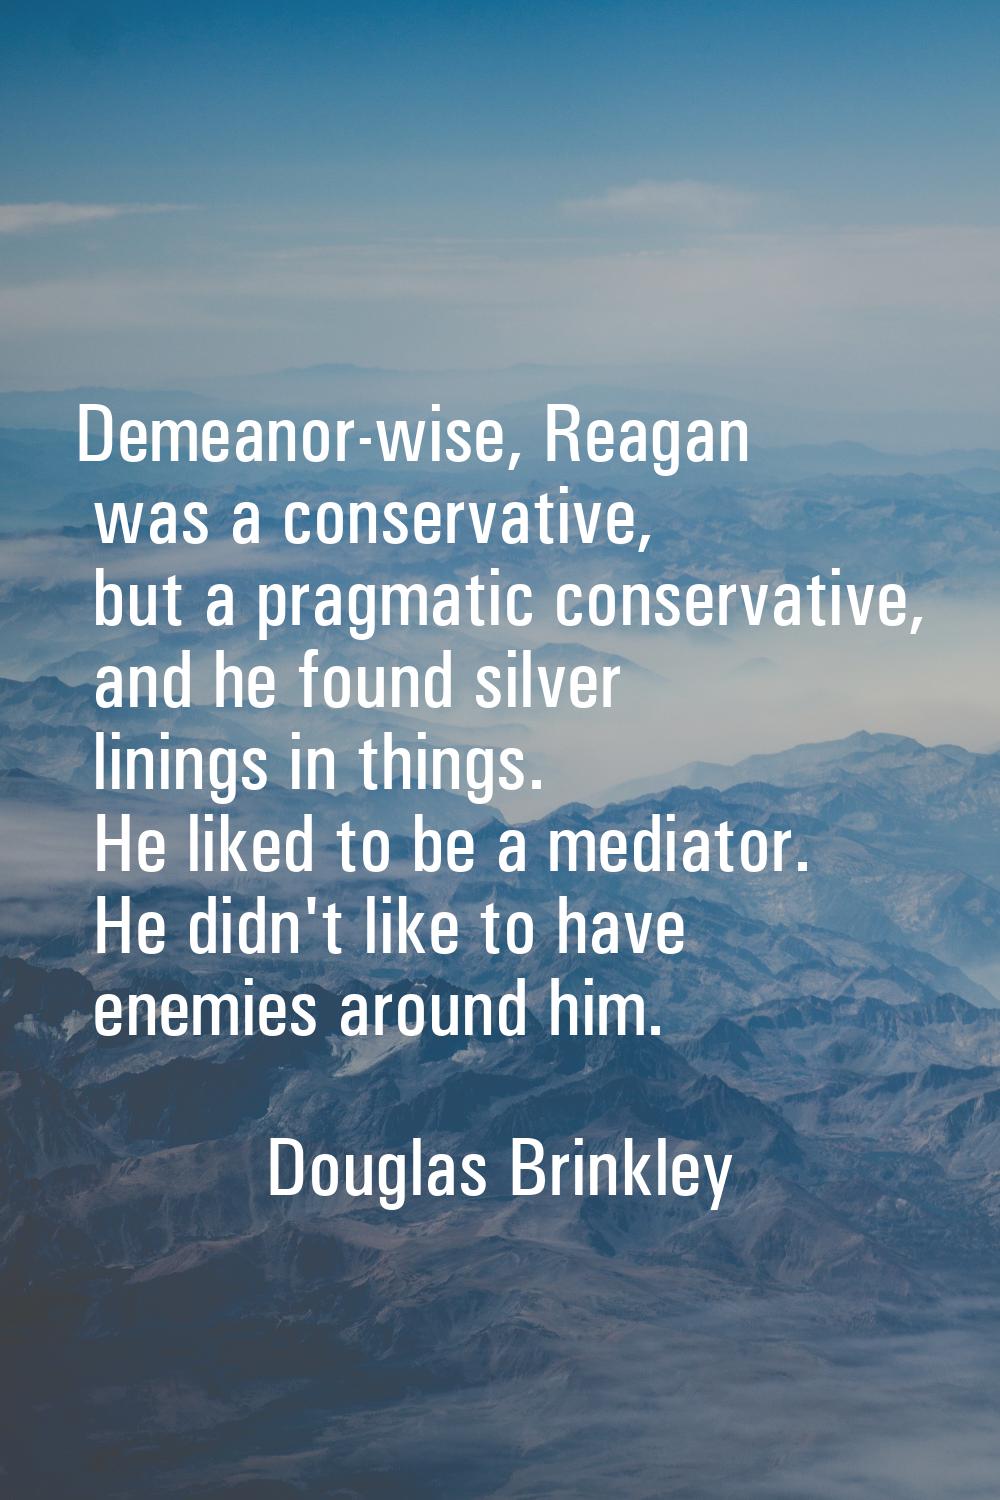 Demeanor-wise, Reagan was a conservative, but a pragmatic conservative, and he found silver linings